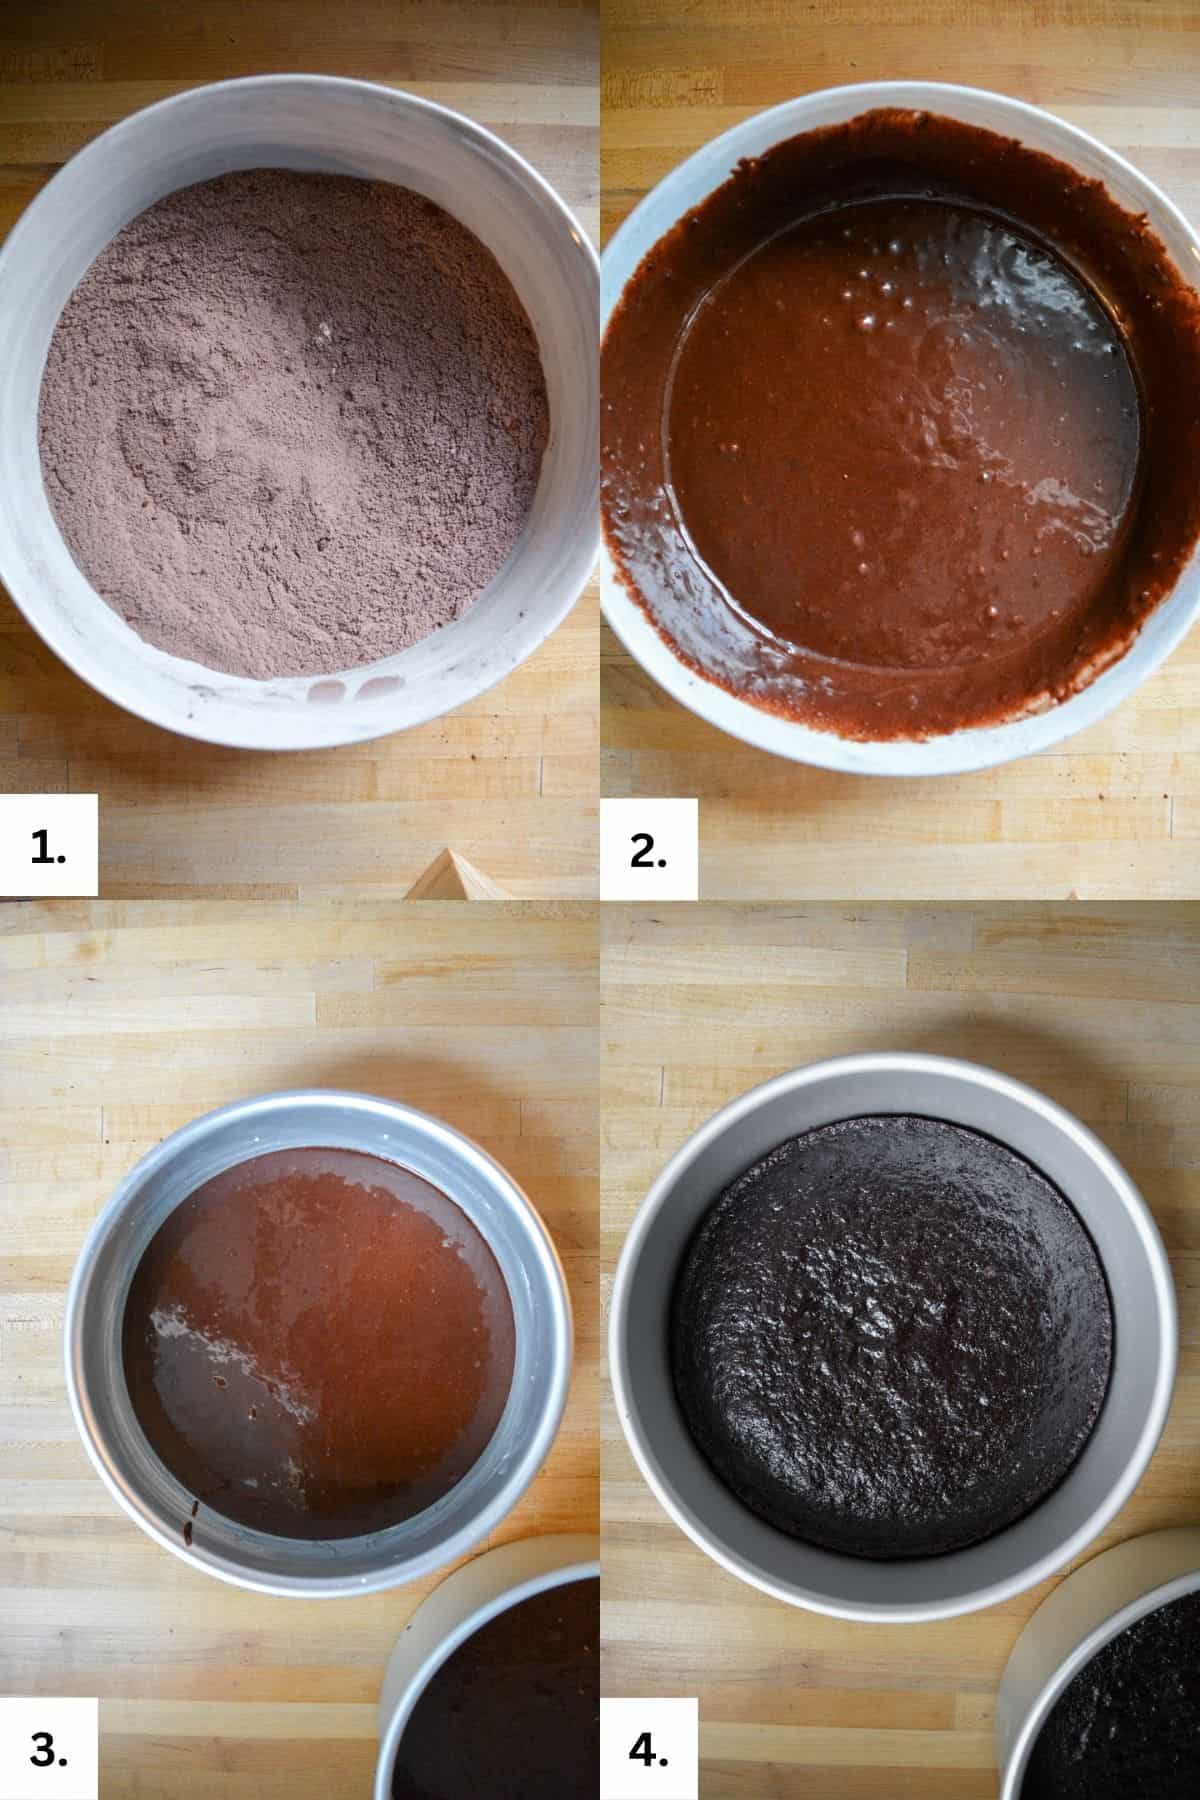 Step-by-step photos of mixing the chocolate cake batter, pouring it into cake pans and baking it.